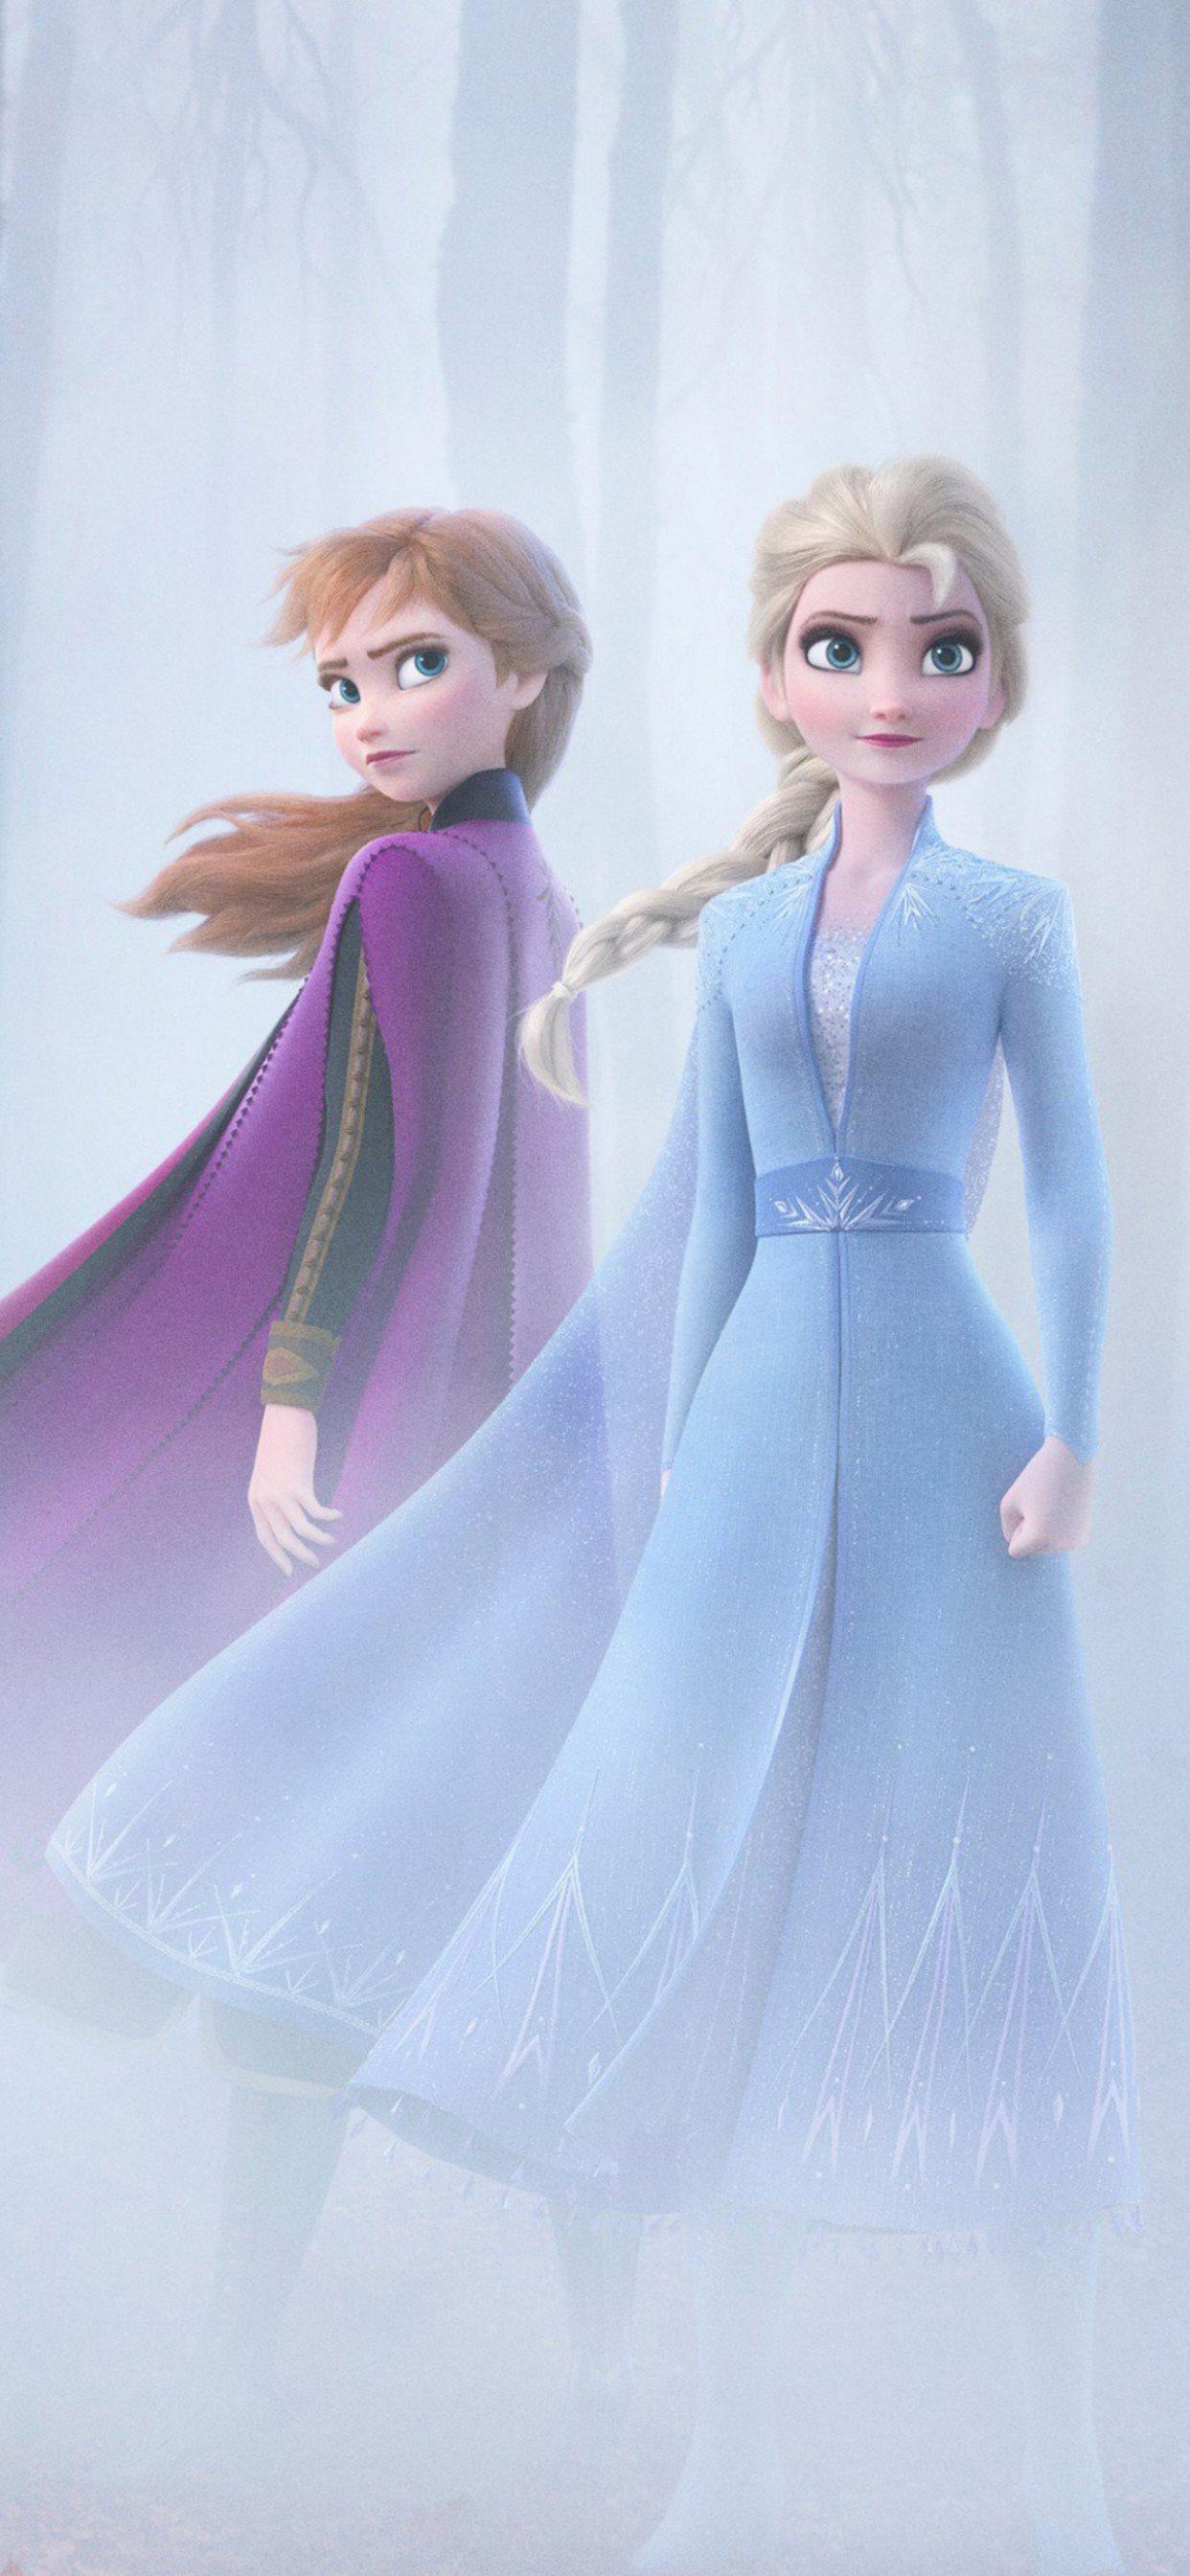 anna and elsa in frozen 2 4k iPhone Wallpaper Free Download